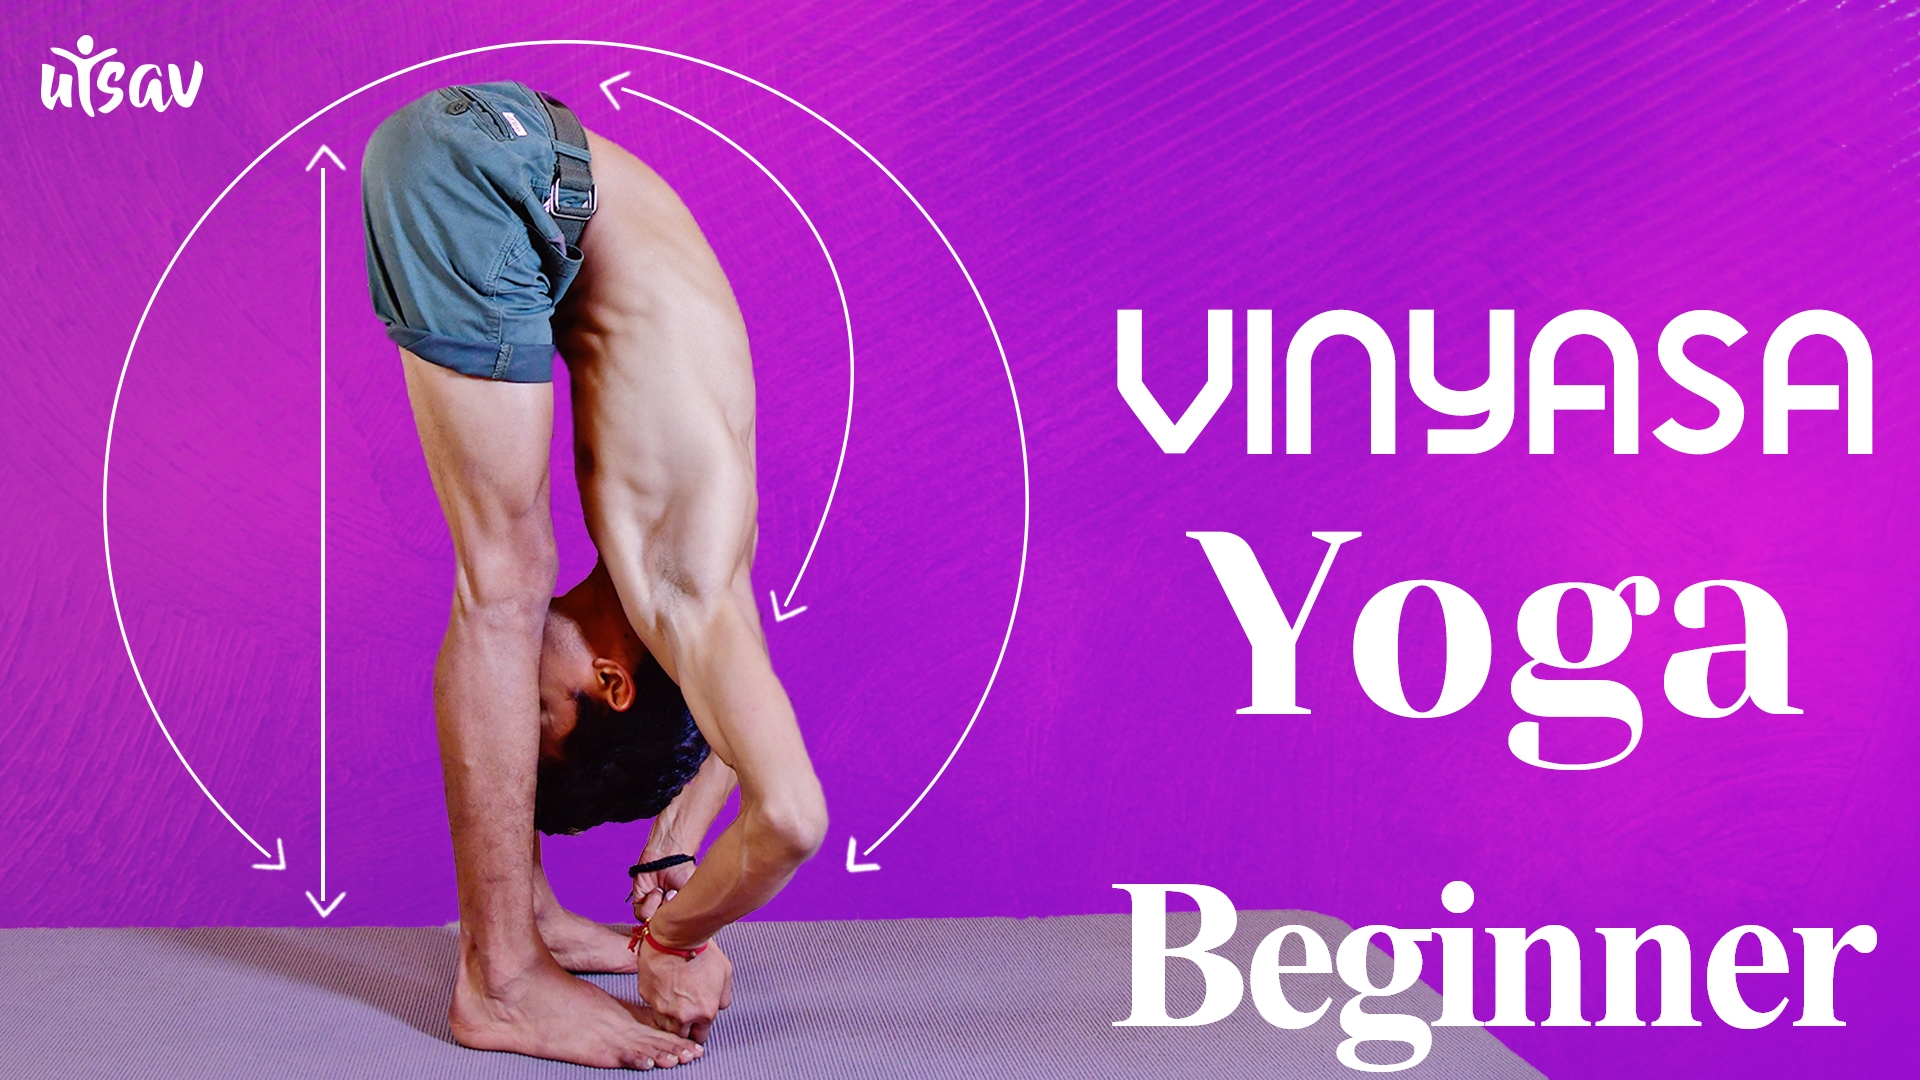 Vinyasa Yoga for Lower Back Care: Stability | DoYogaWithMe